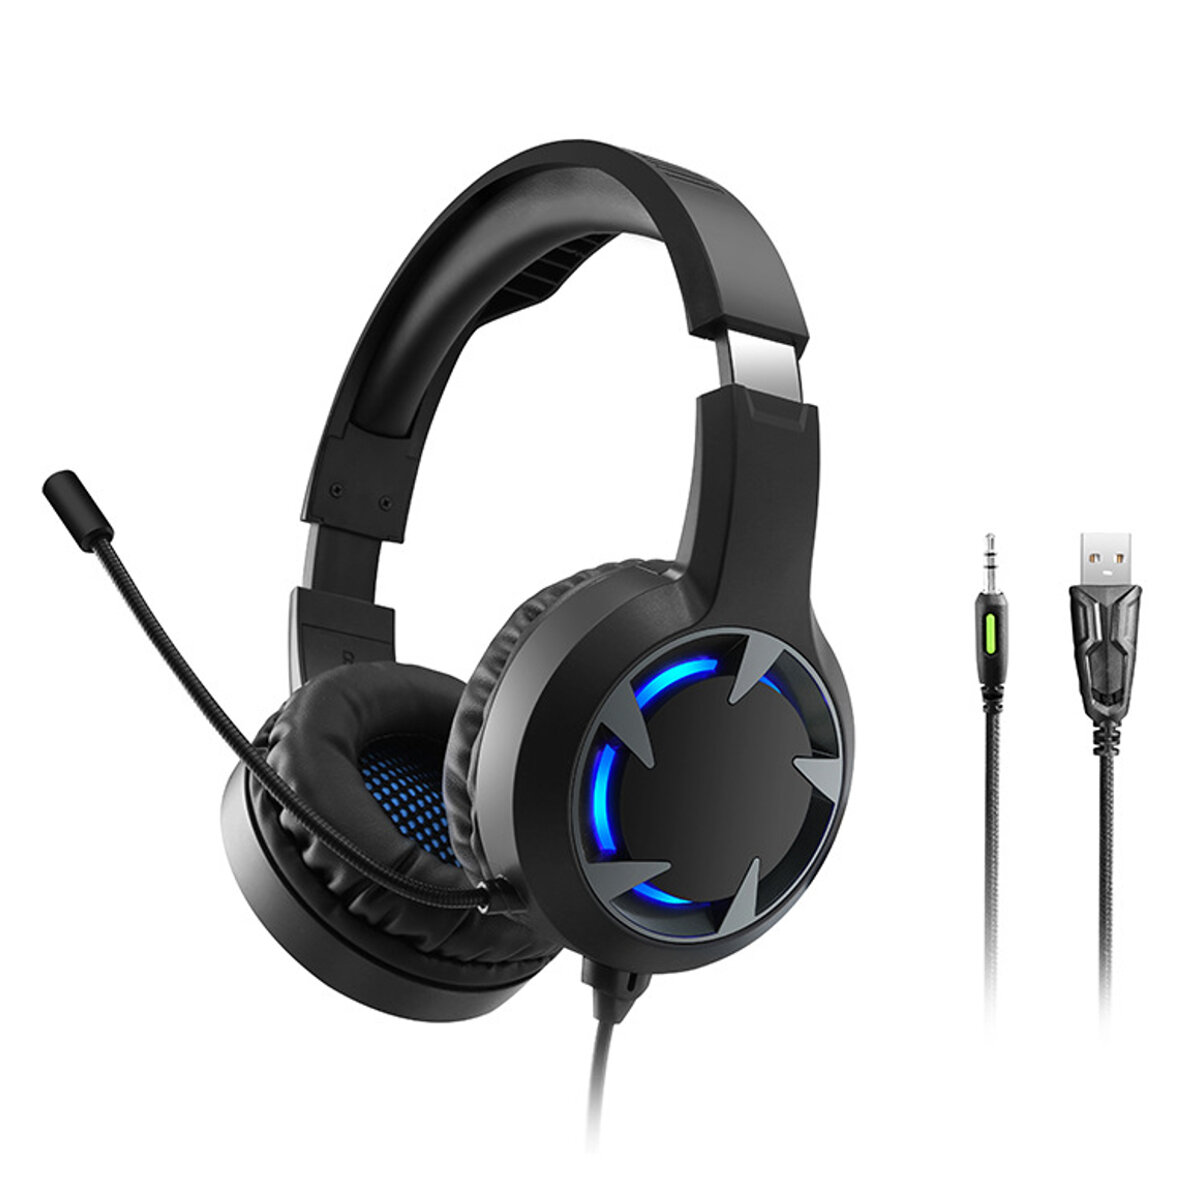 

Bakeey Wired Headphones Stereo Bass Surround Gaming Headset for PS4 New for Xbox One PC with Mic